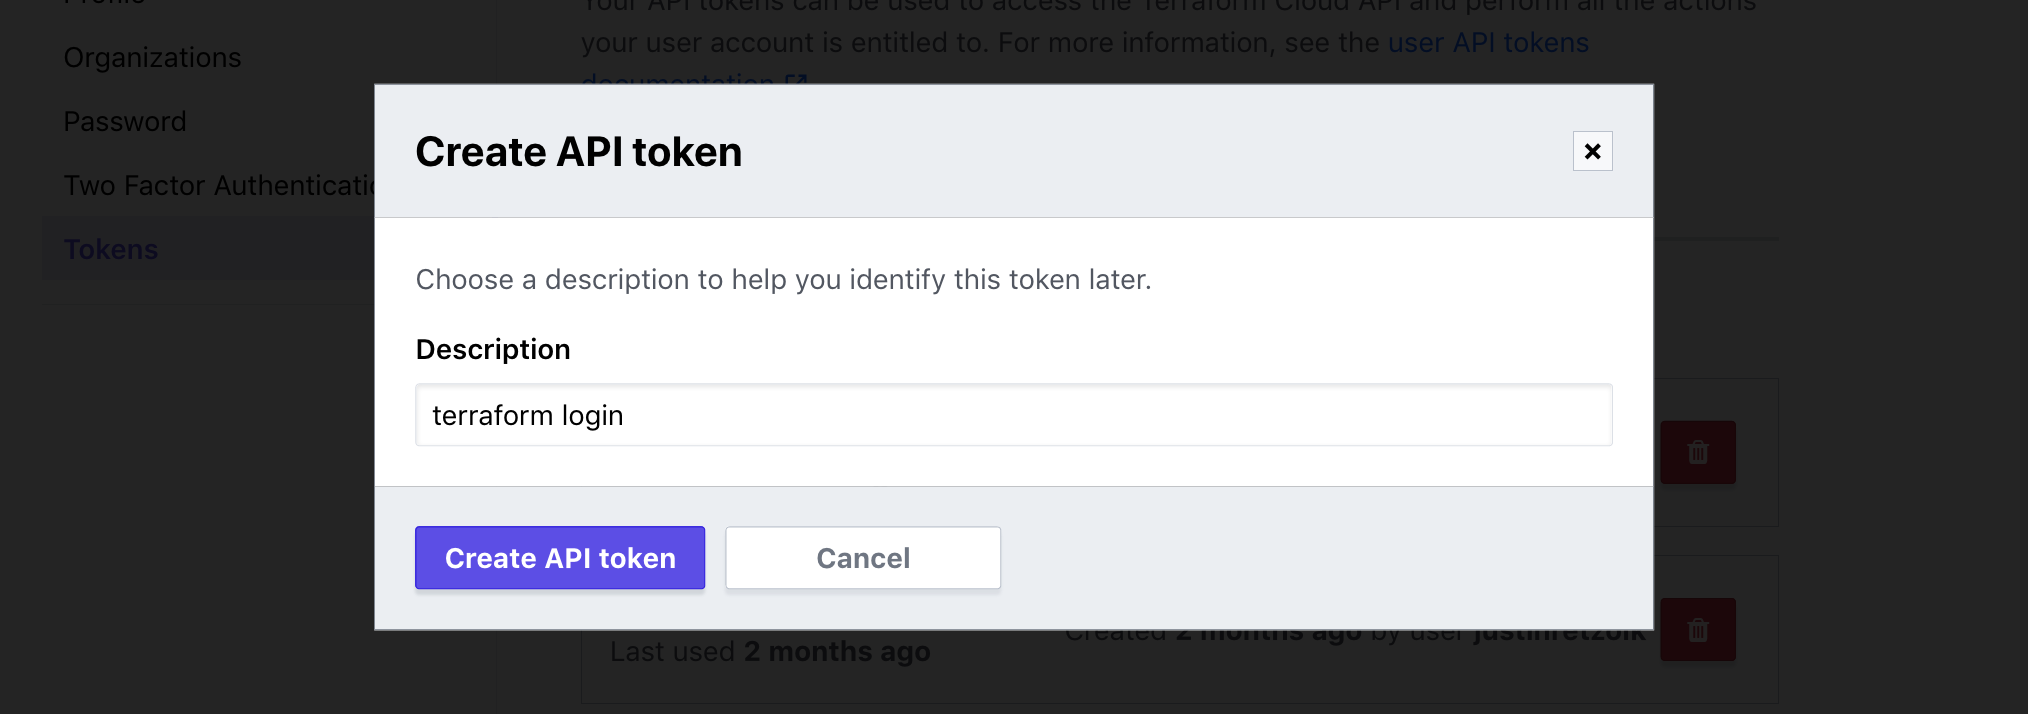 Modal window in HCP Terraform titled "Create API token". There is a text box to set a name for the token.